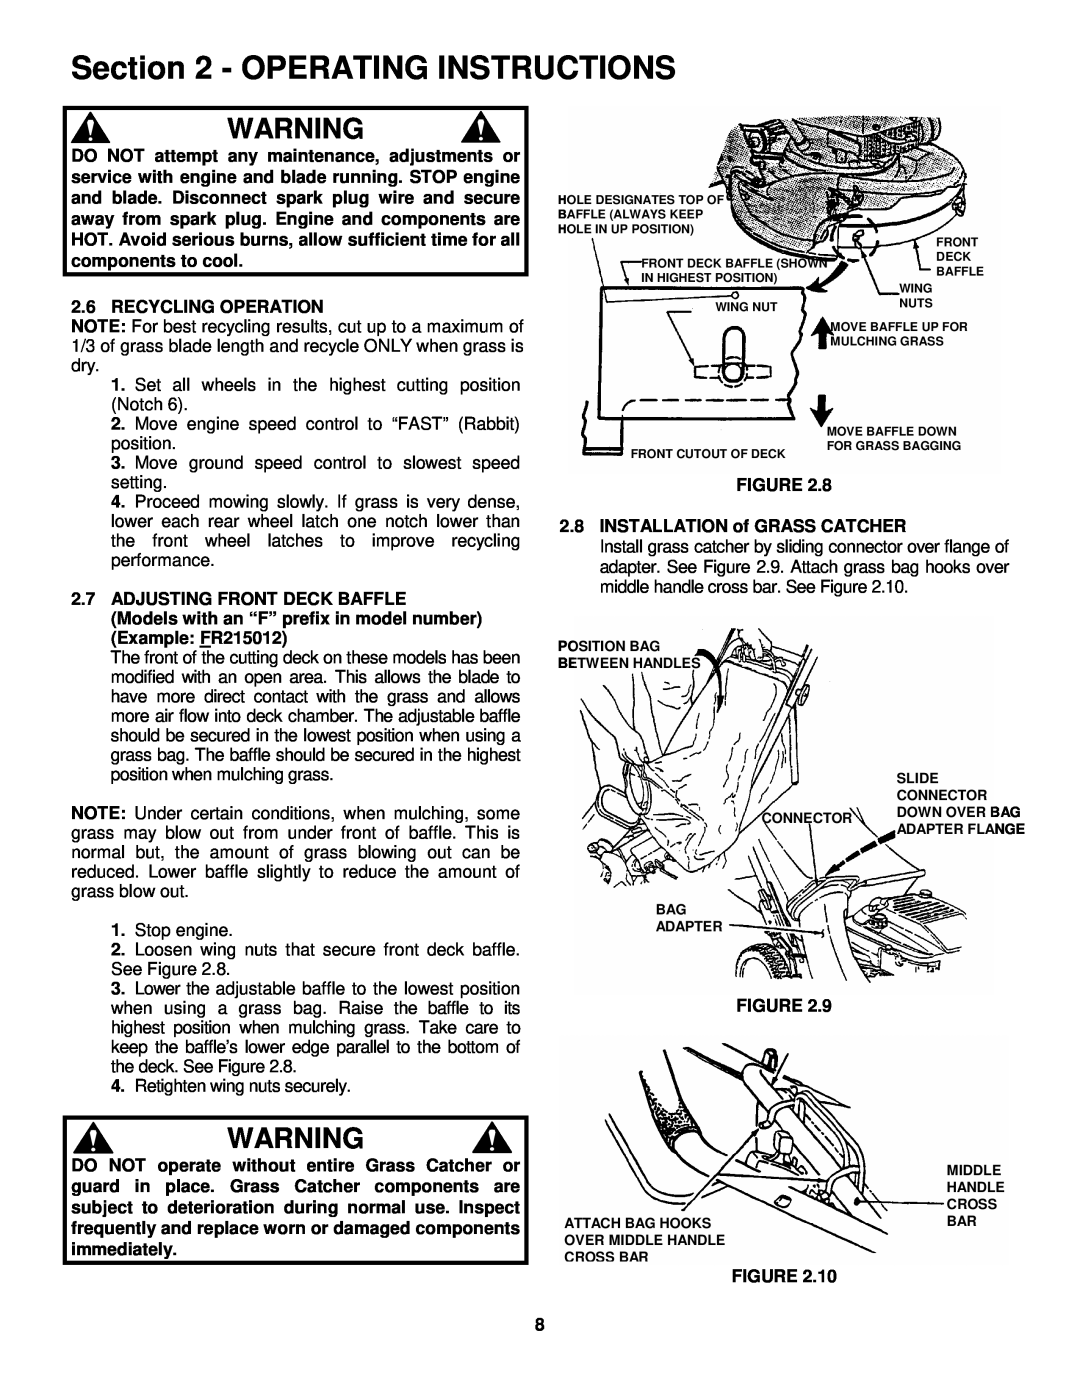 Snapper FRP216016 important safety instructions Operating Instructions, Recycling Operation 